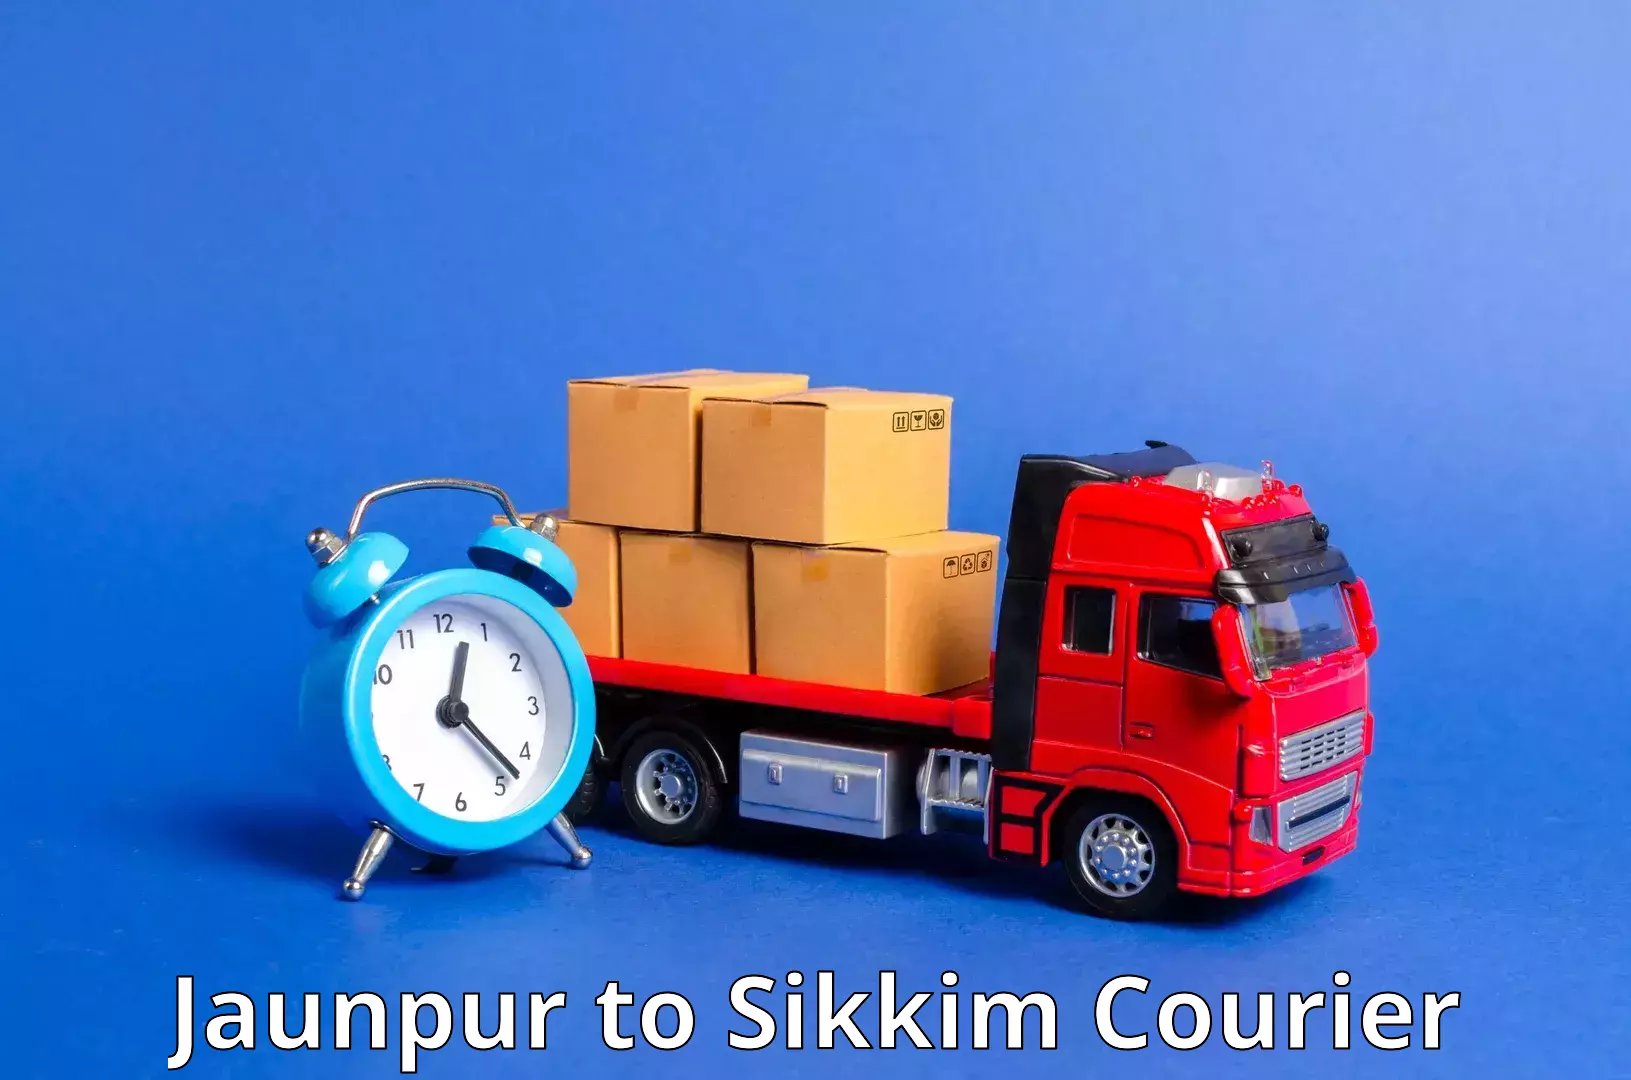 Advanced shipping technology in Jaunpur to Pelling